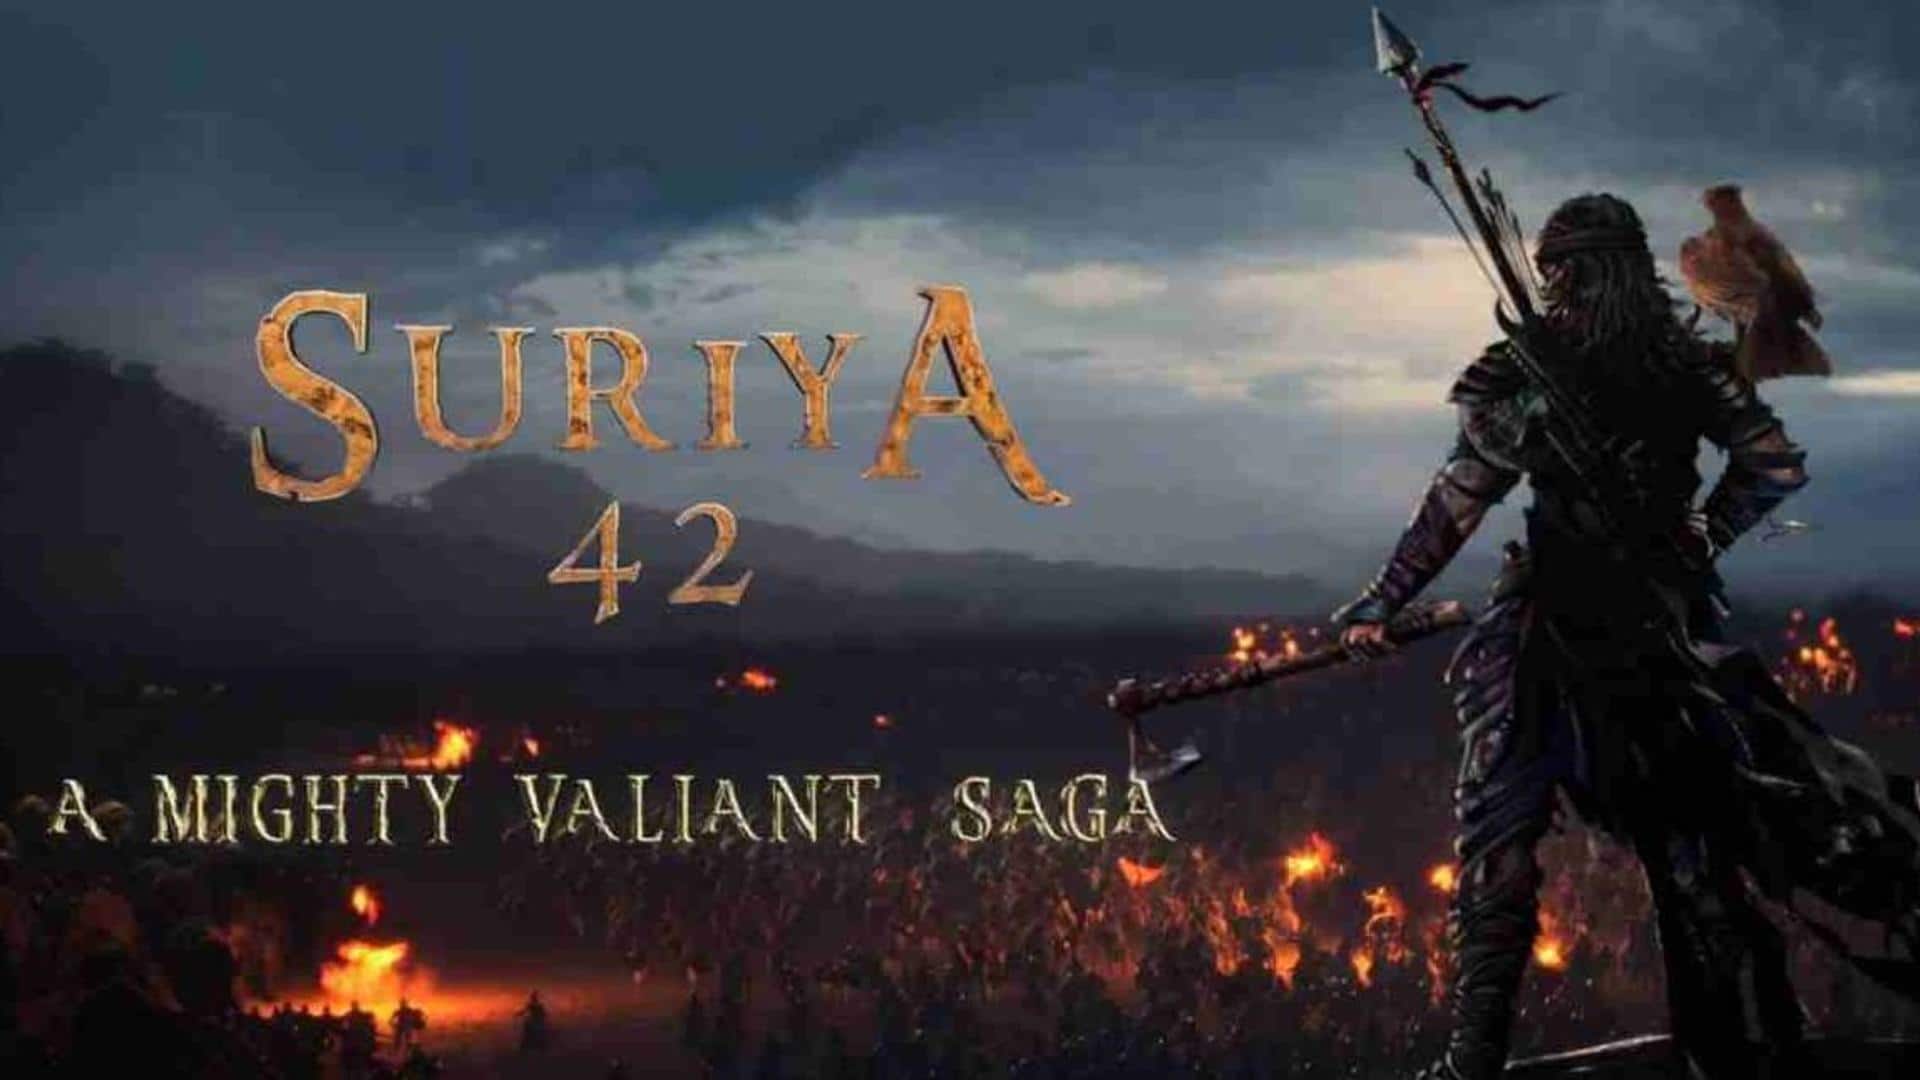 'Suriya 42' music rights sold to Saregama label, announce makers